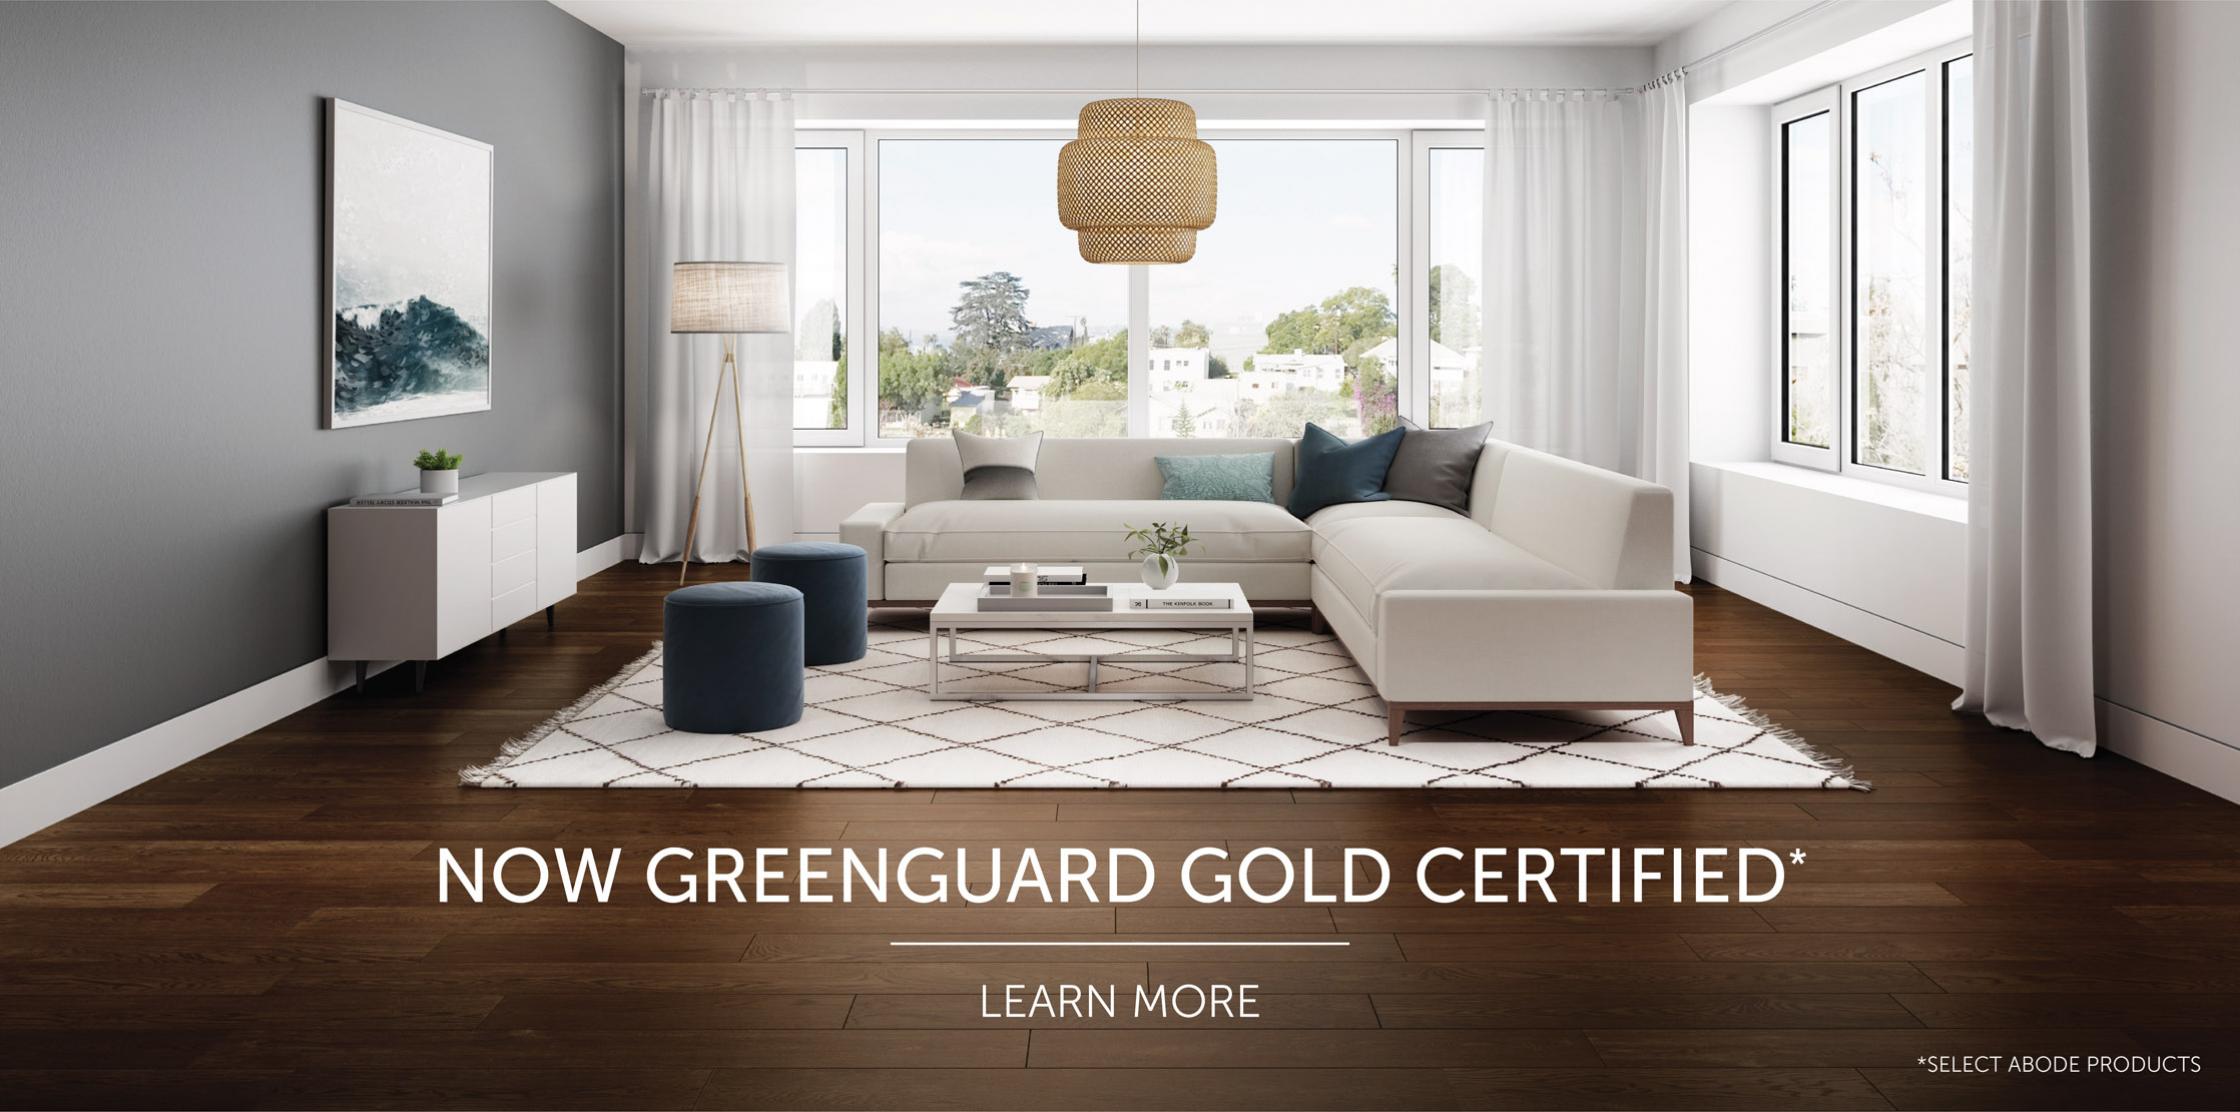 Selected Abode Products Now Greenguard Gold Certified